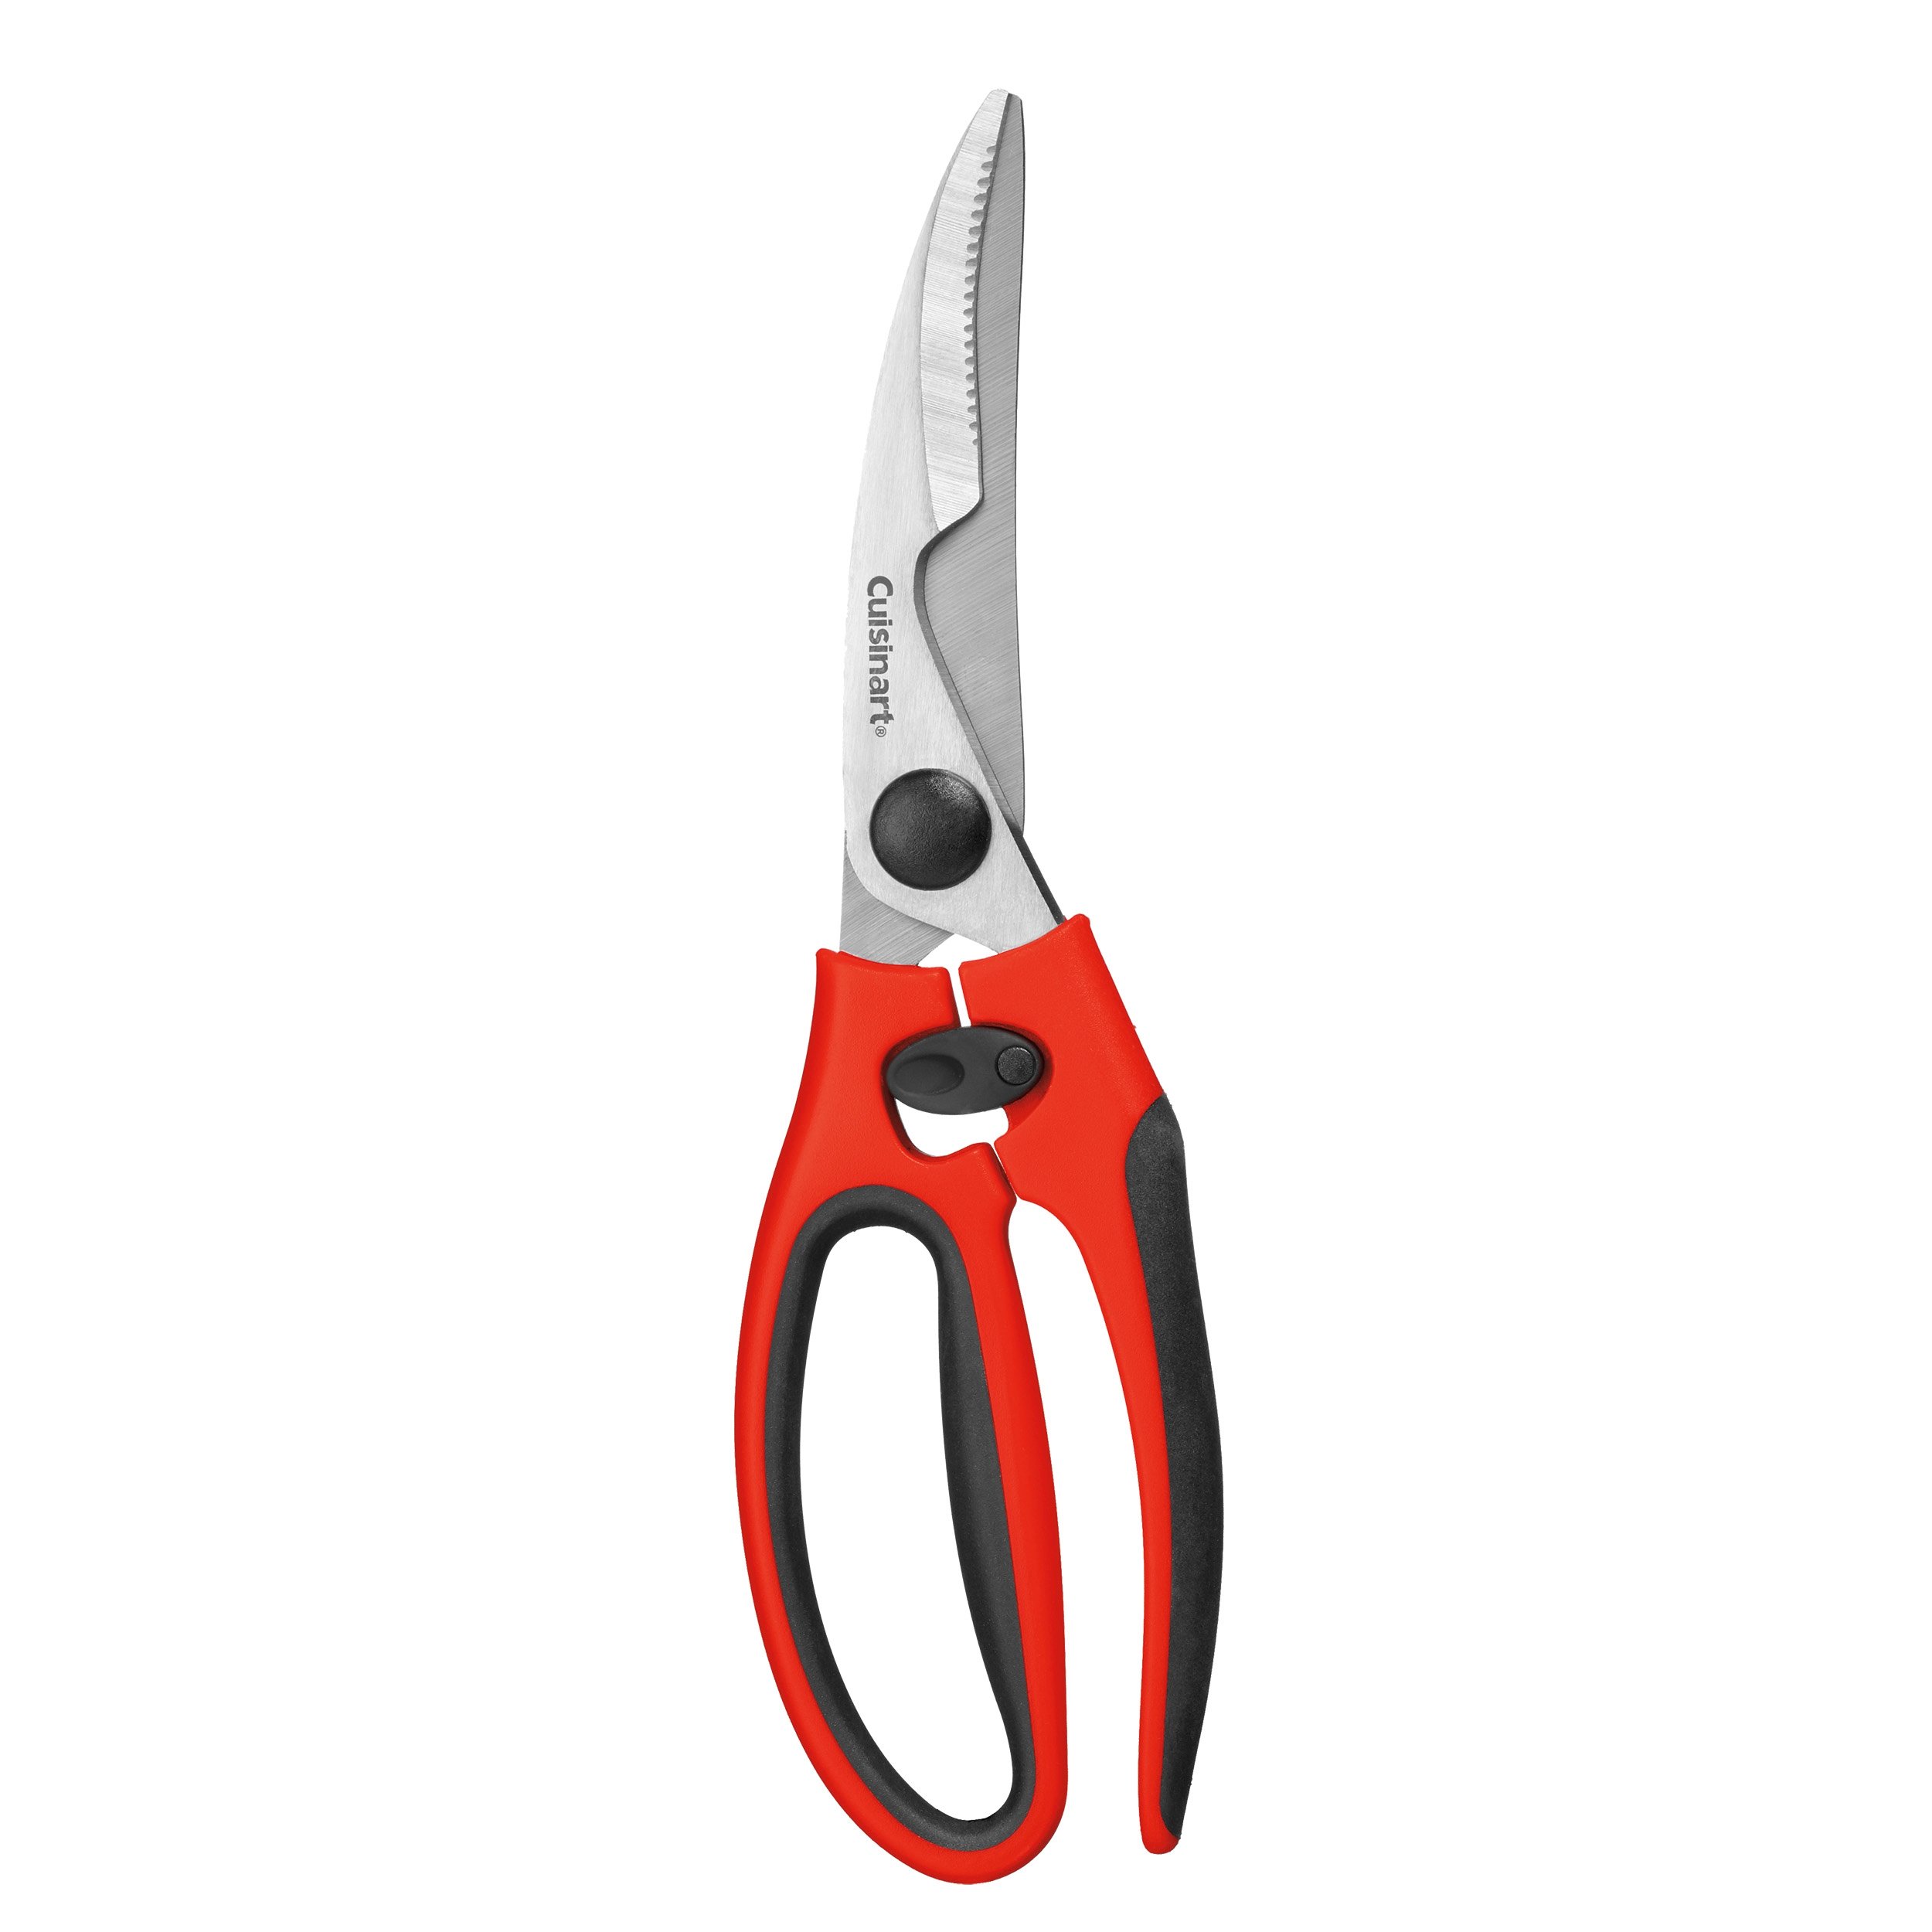 9" Poultry Shears with Soft-Grip Handles